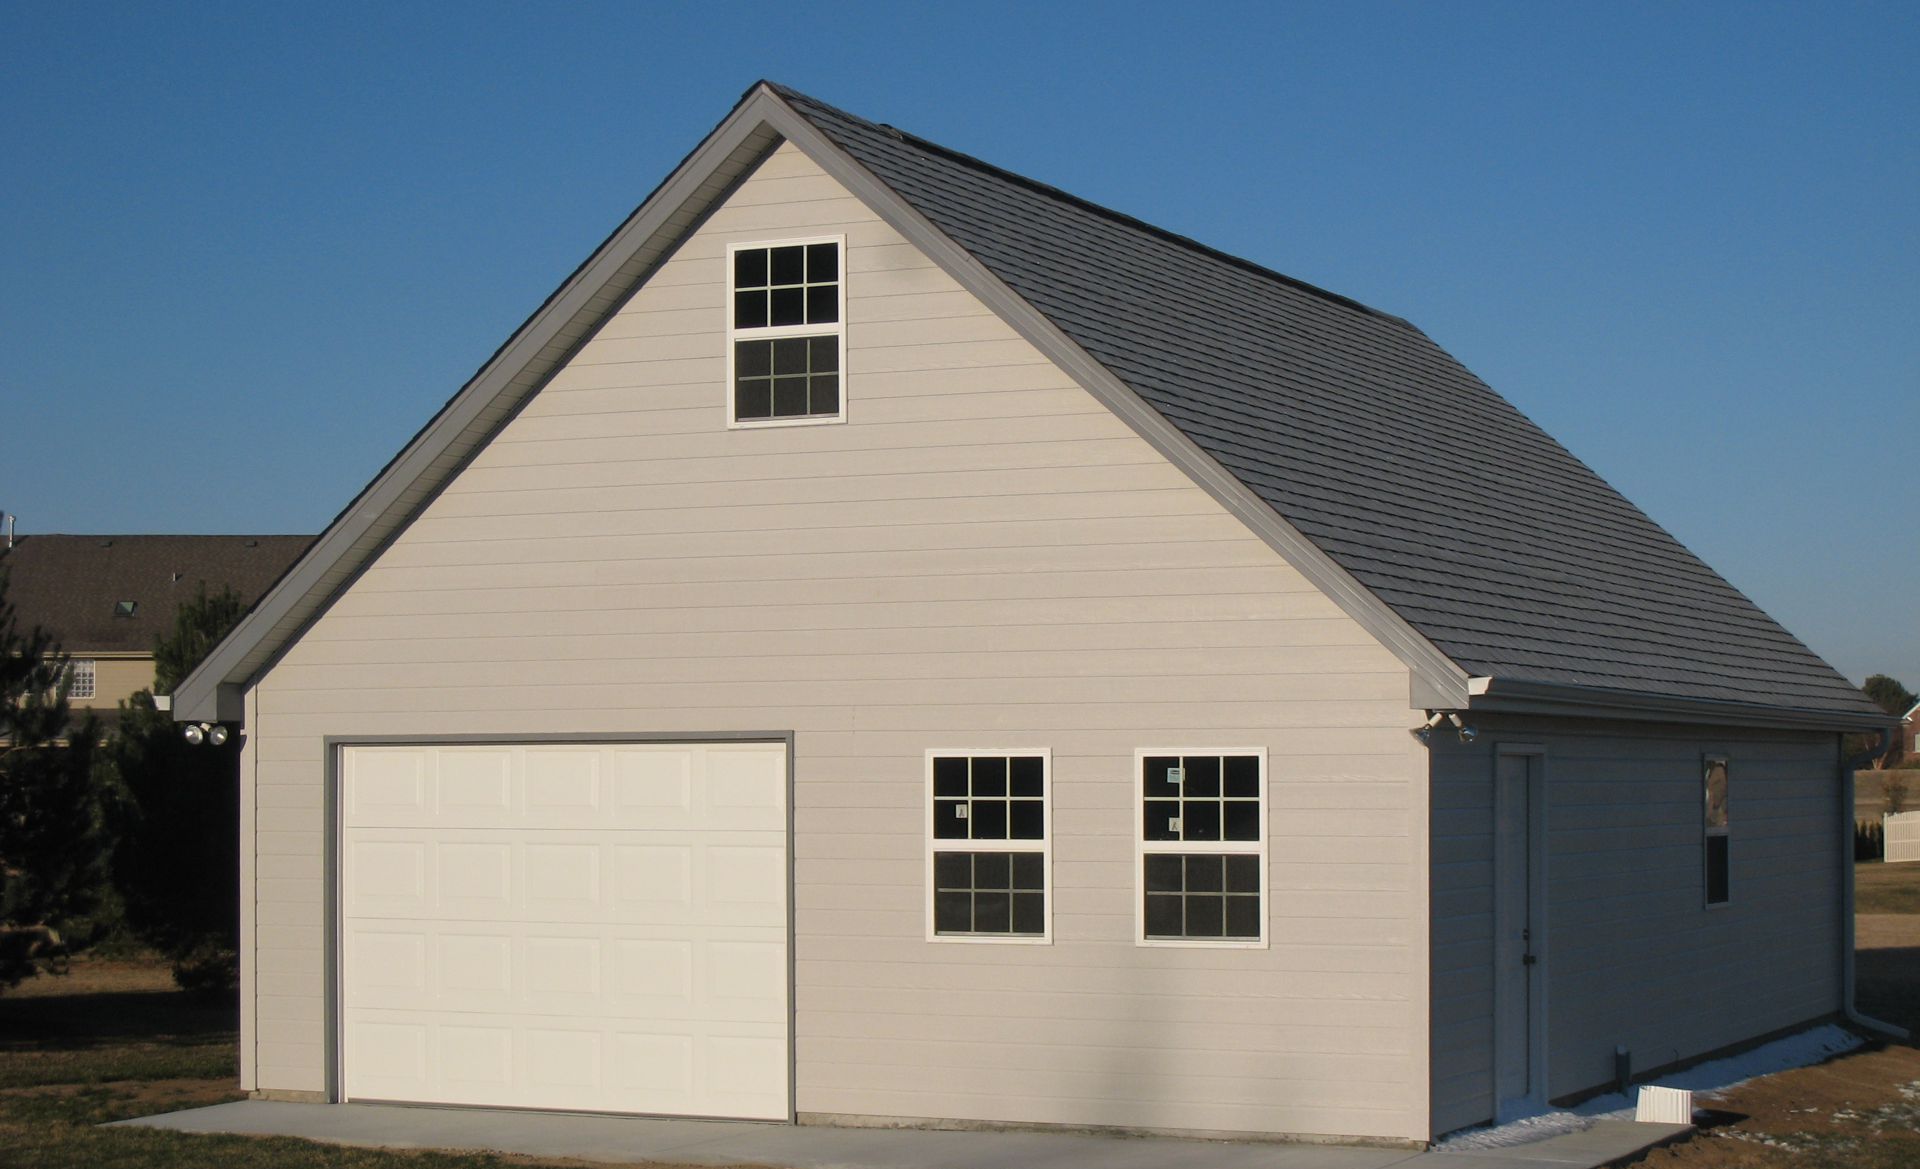 Large Garages | The Garage Company